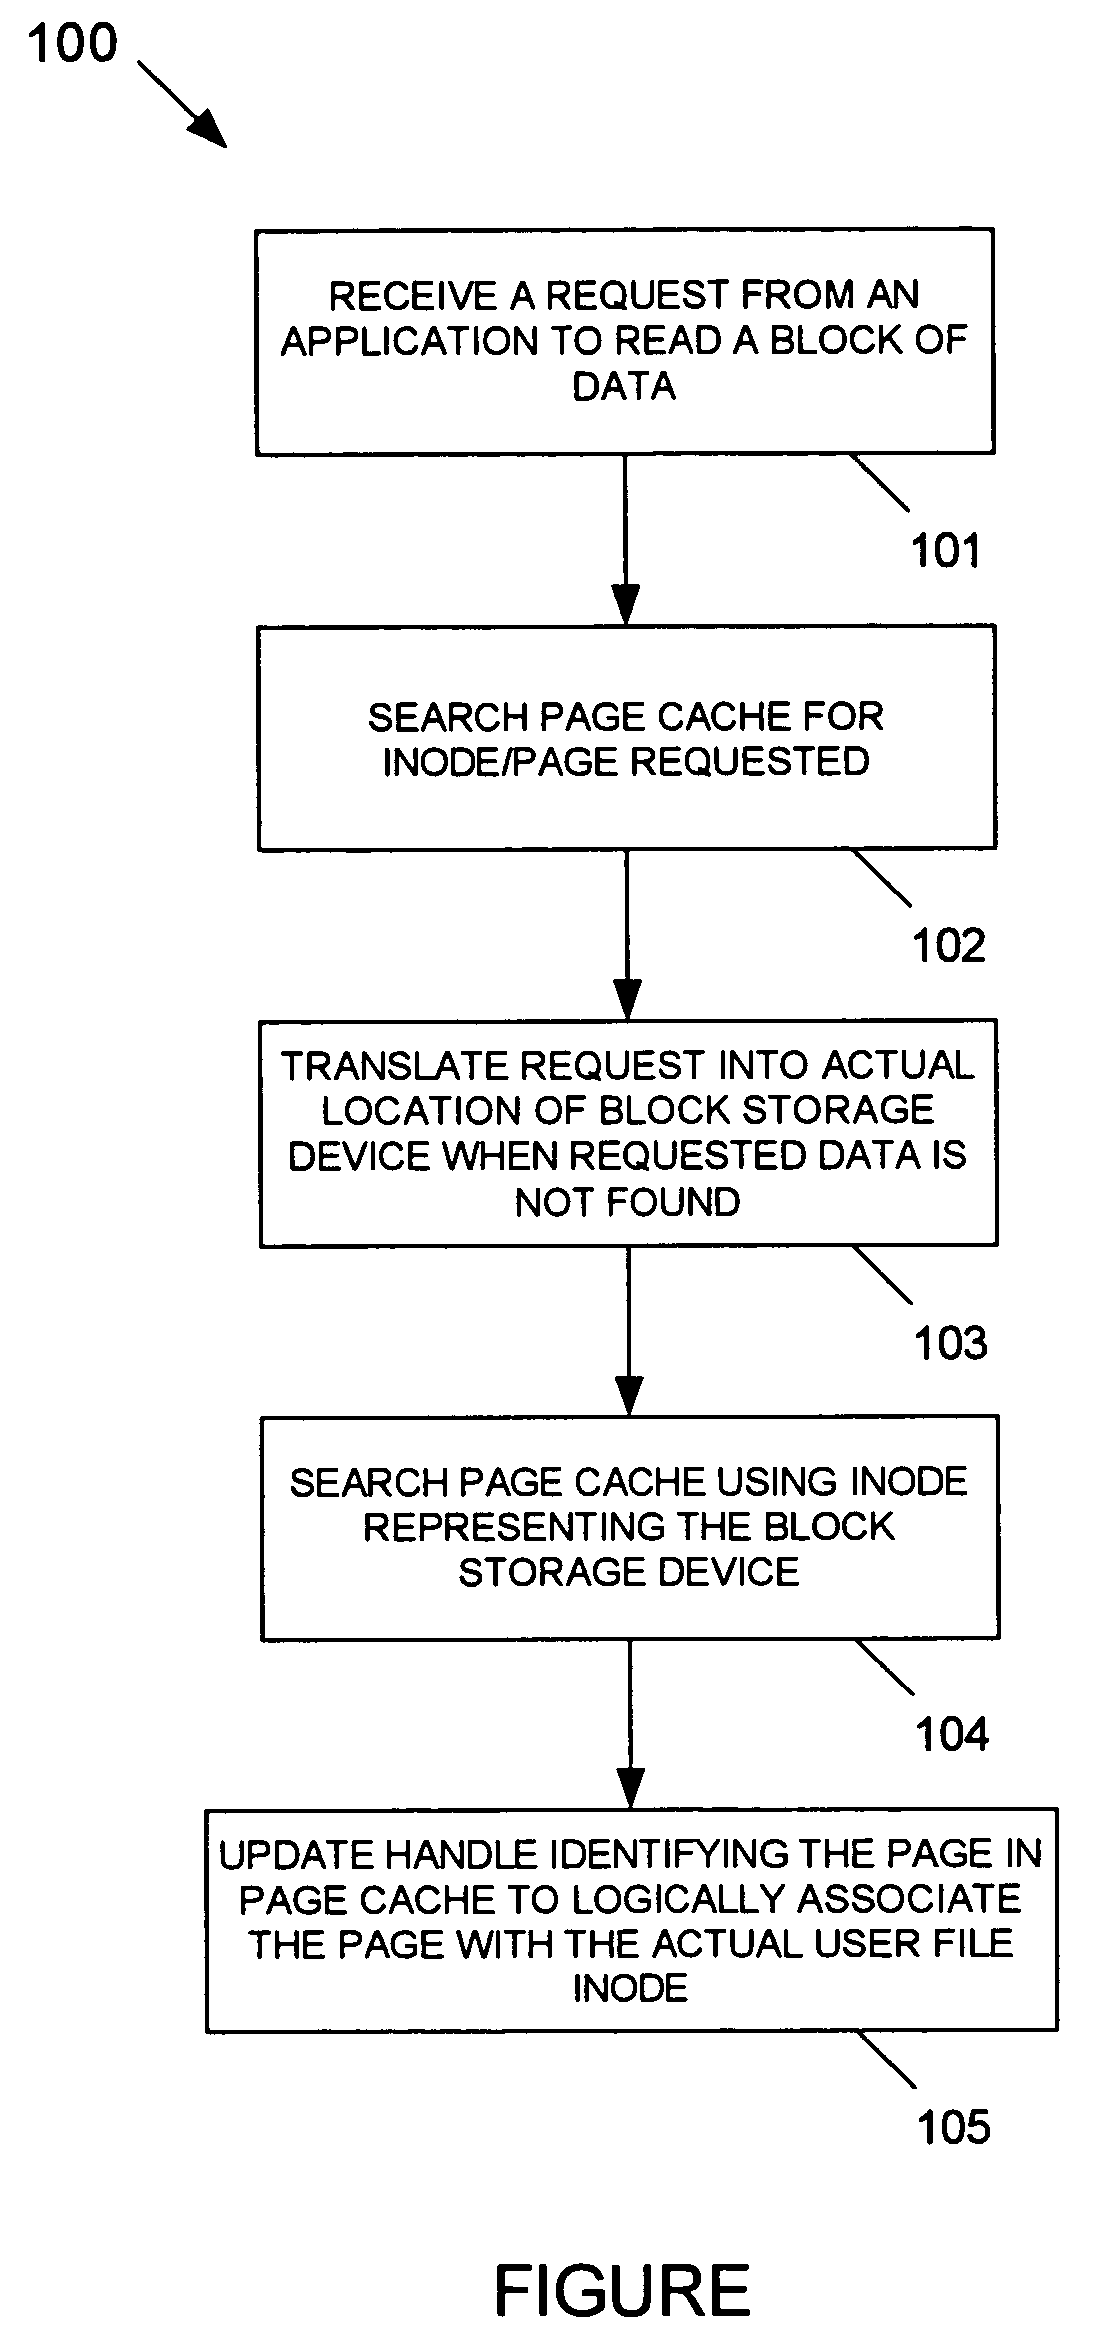 Multi-level page cache for enhanced file system performance via read ahead